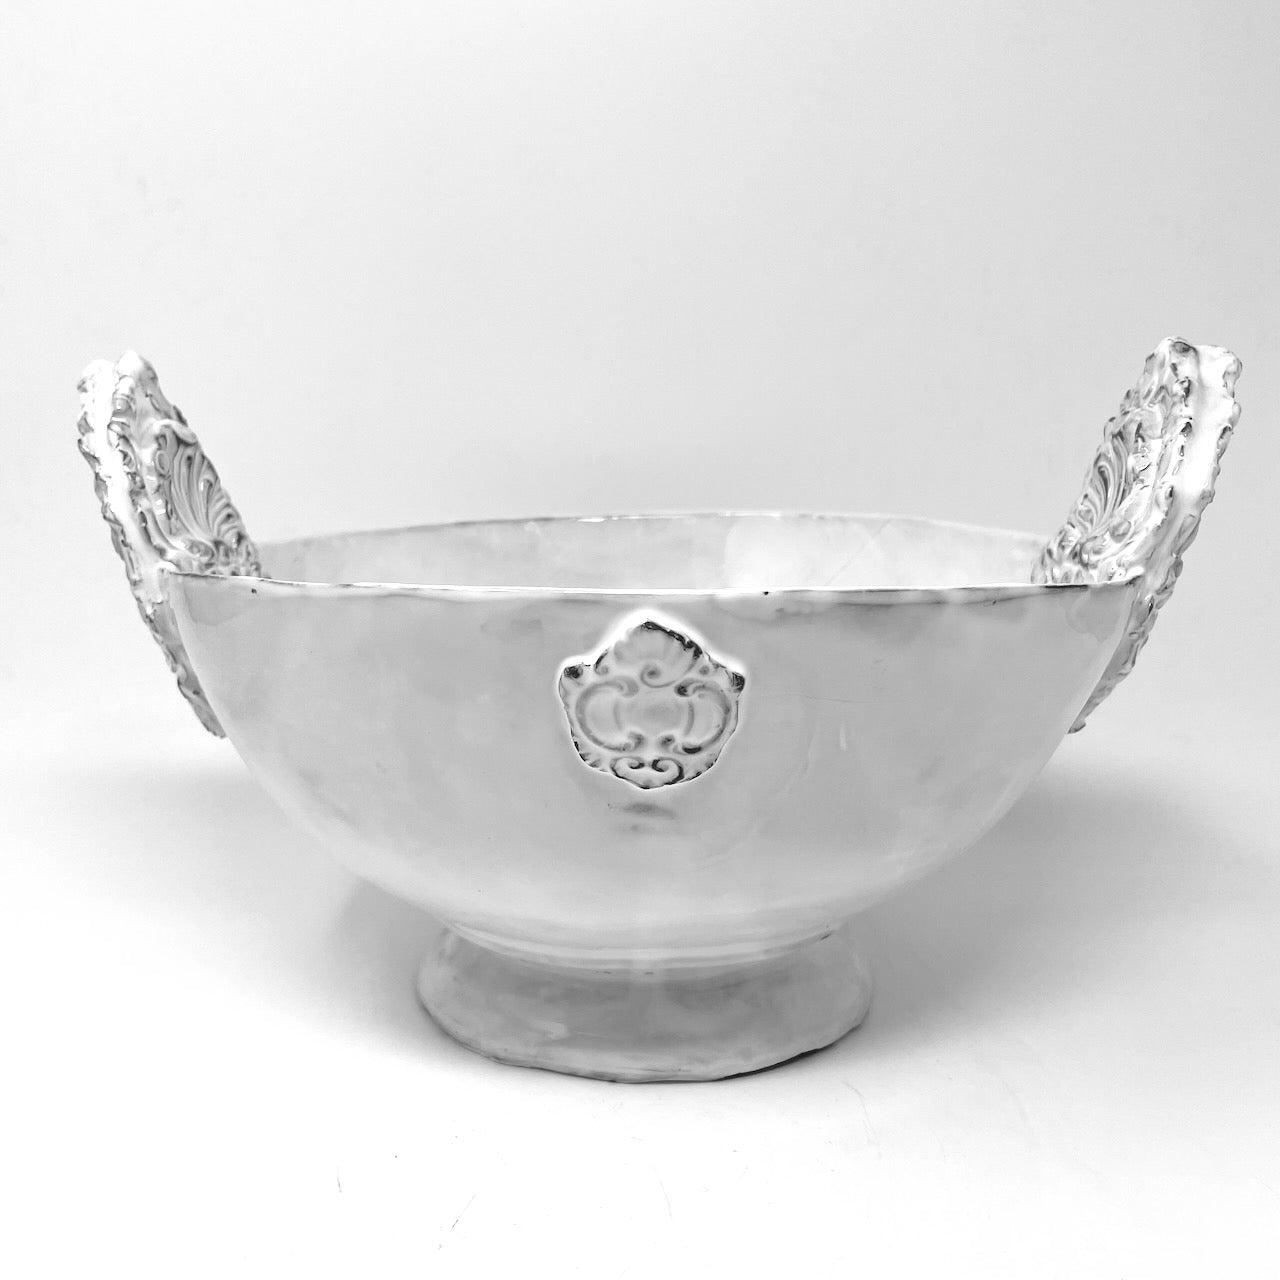 Charles serving bowl with handle